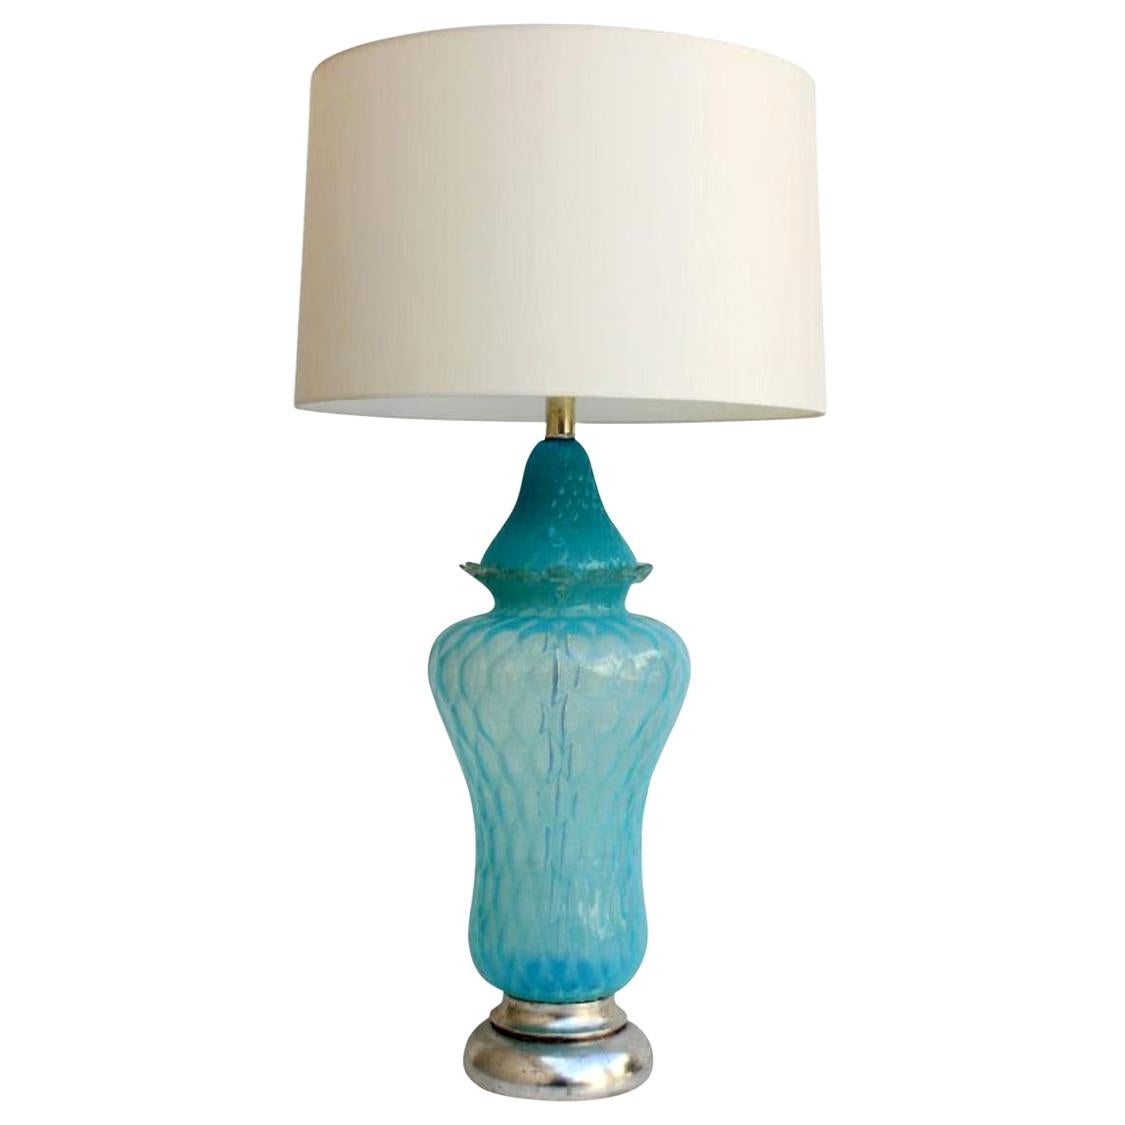 Vintage Hollywood Regency Turquoise Quilted Murano Glass Table Lamp For Sale